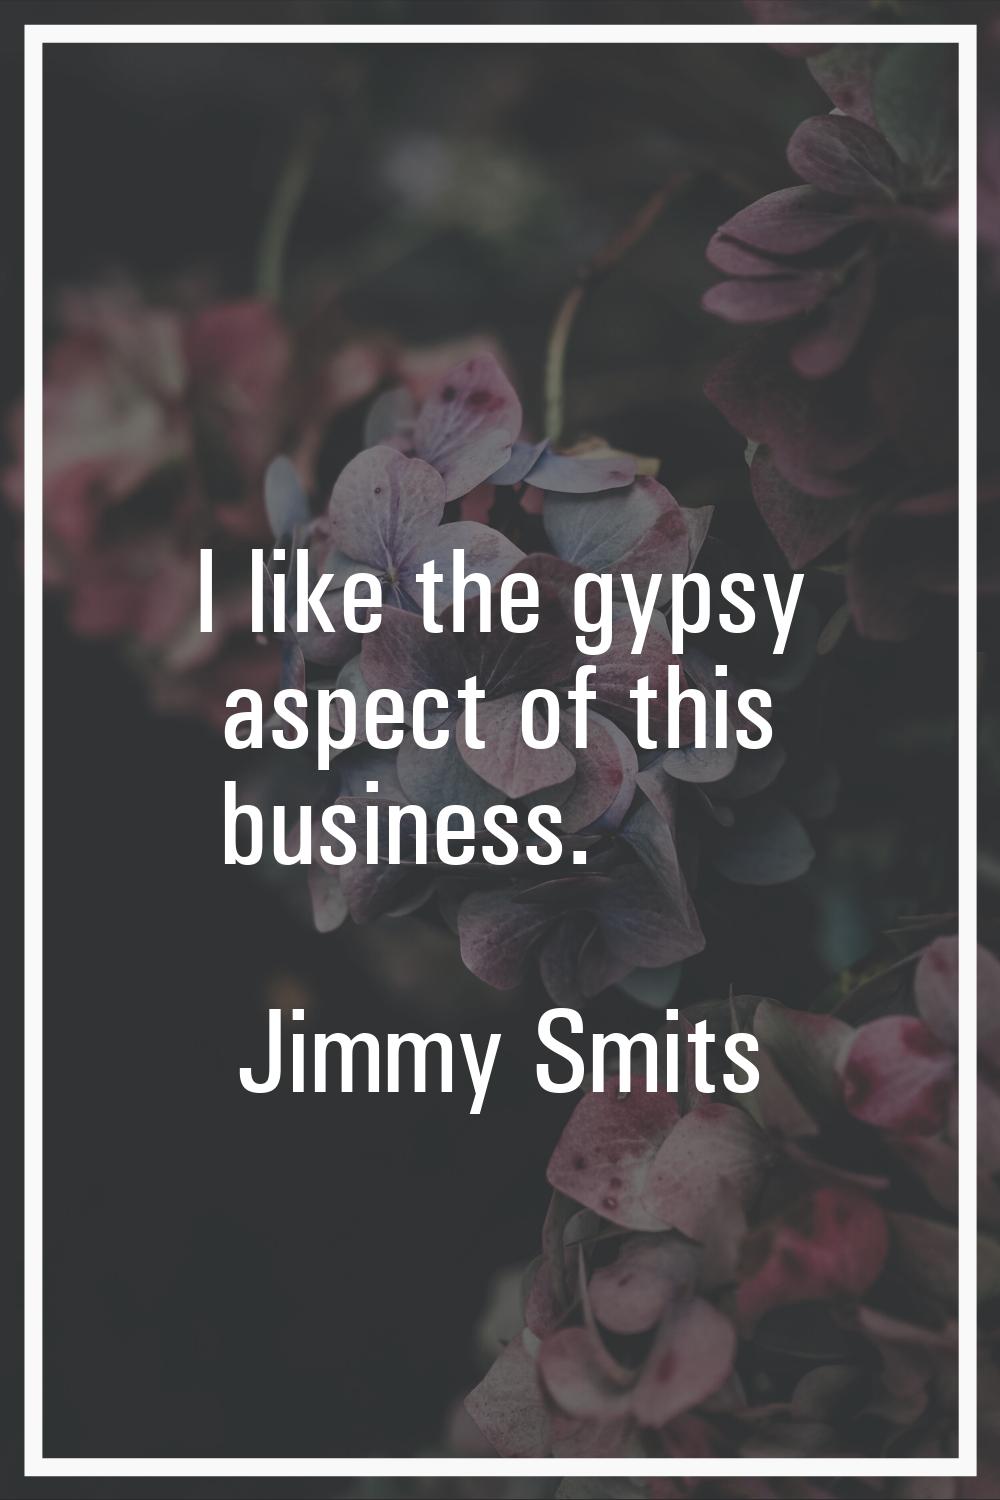 I like the gypsy aspect of this business.